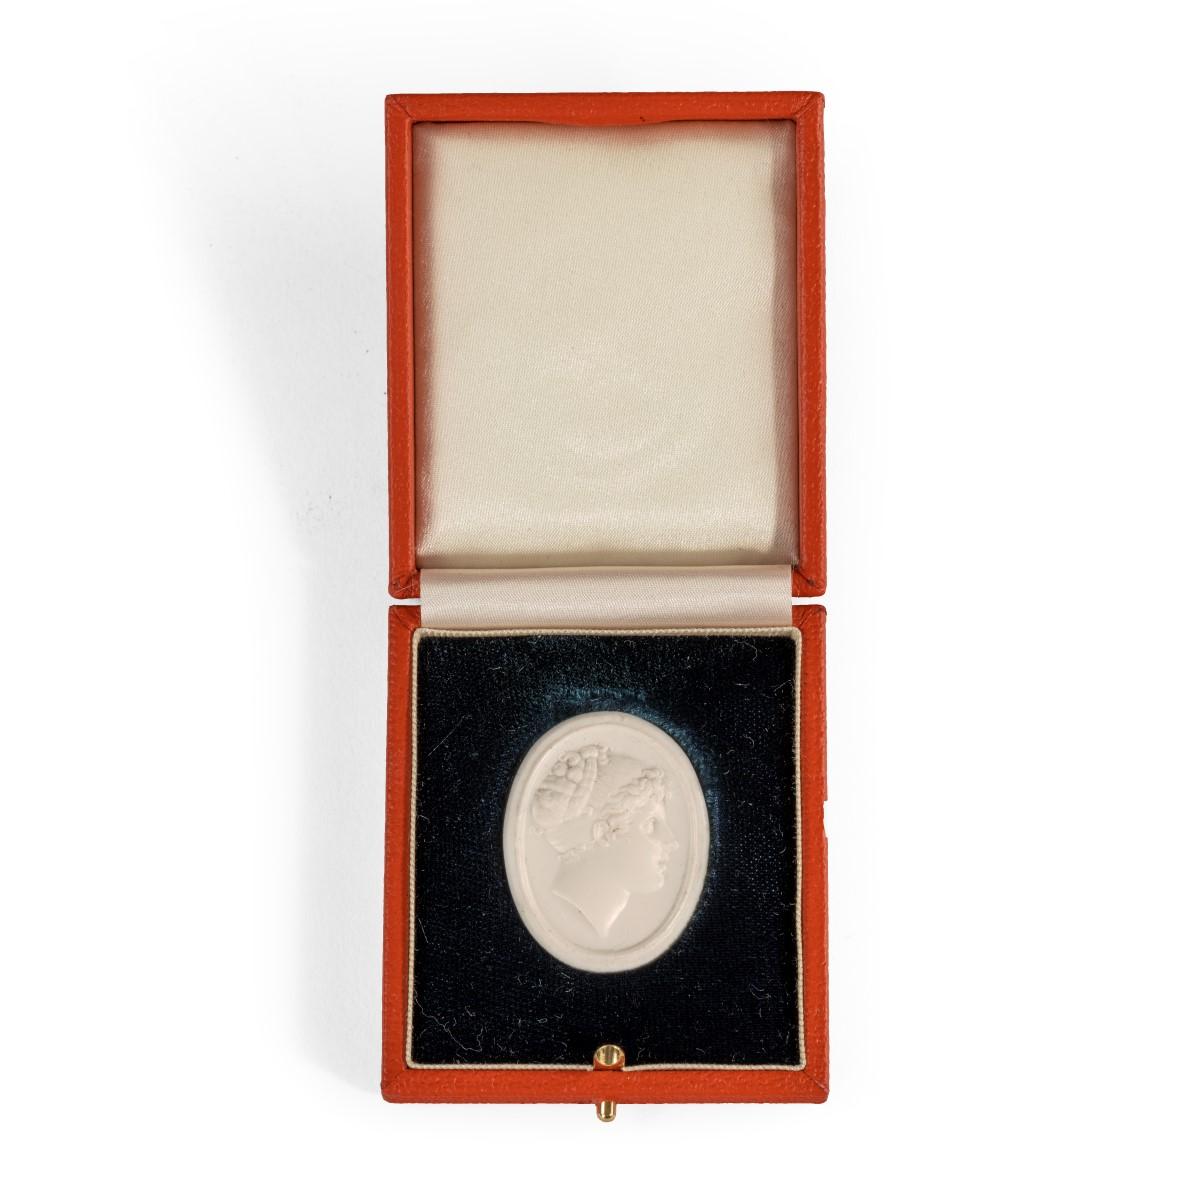 A white vitreous paste cameo of Emma, Lady Hamilton, attributed to William Tassie after Filipo Rega, of oval form depicting Emma facing right with her hair in a Grecian style, English, circa 1800

 

Footnote: William Tassie (1777-1860) was a